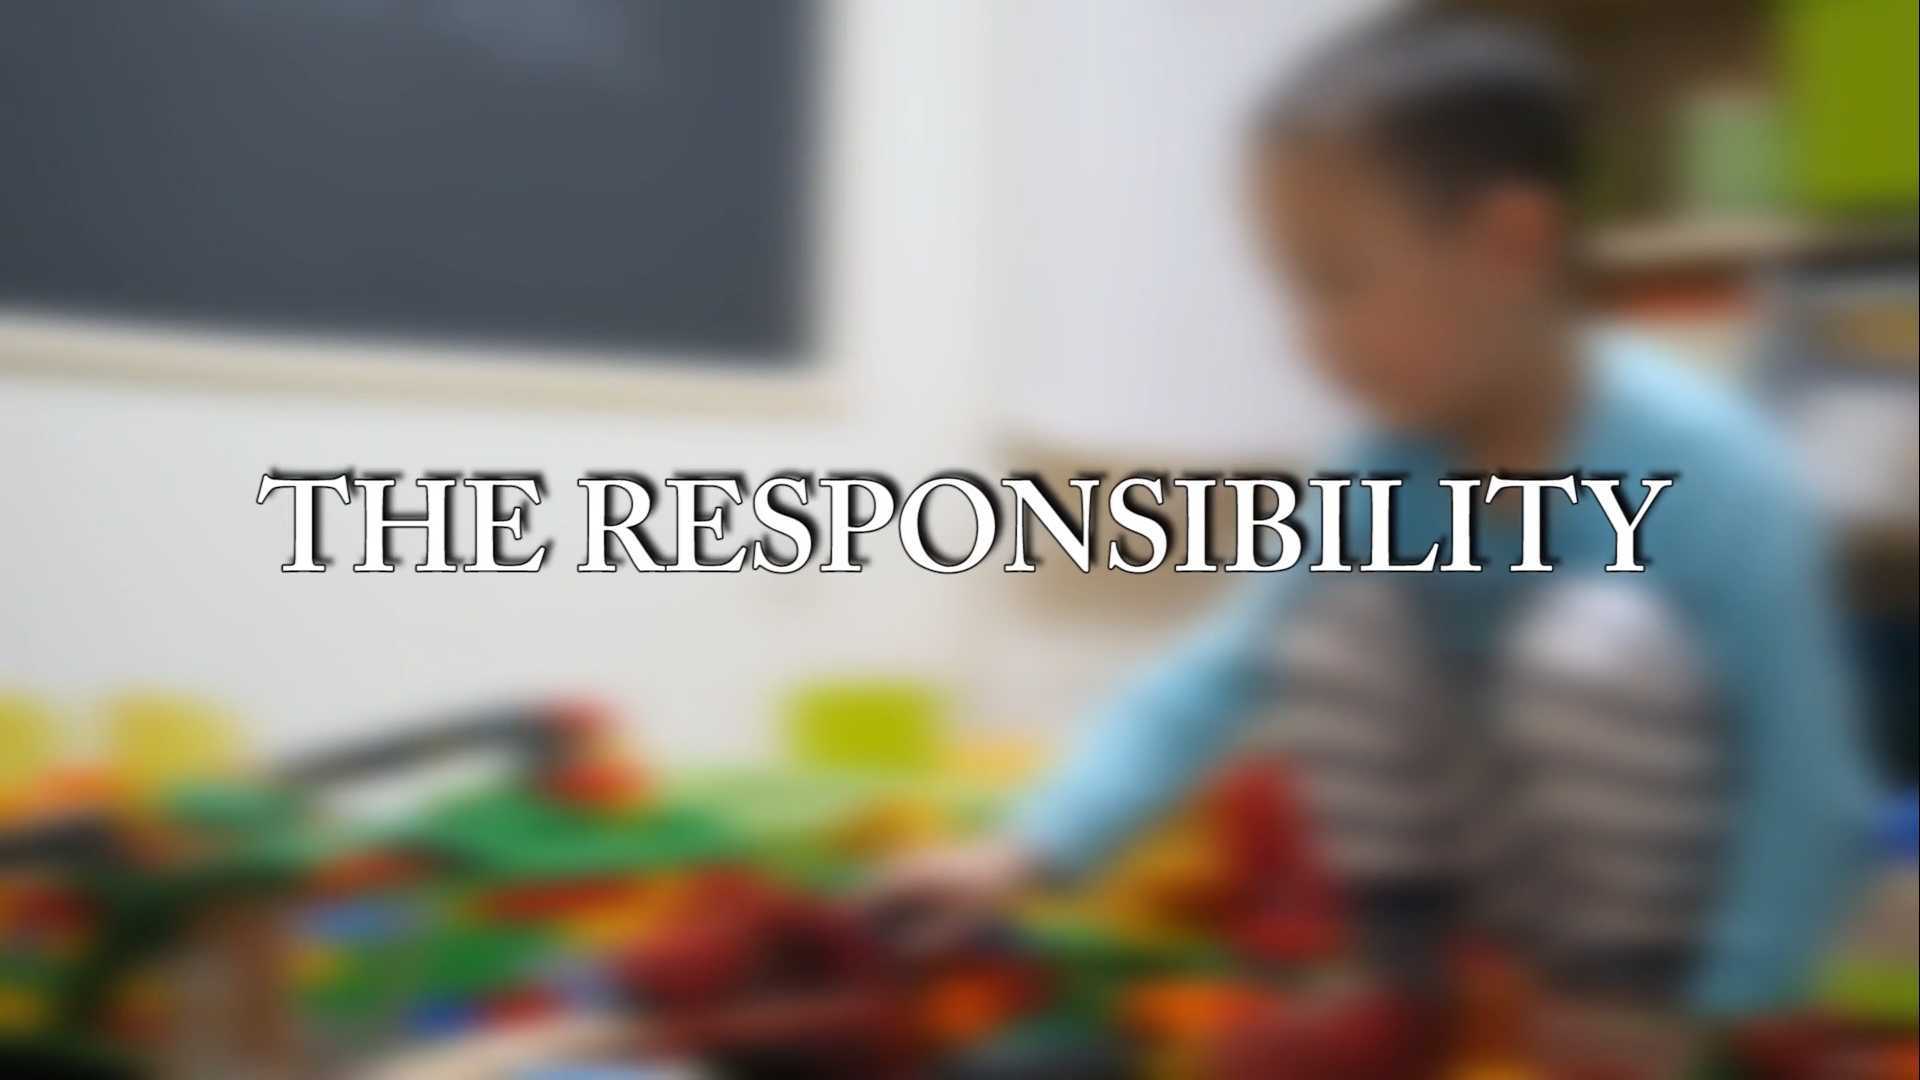 The responsibility